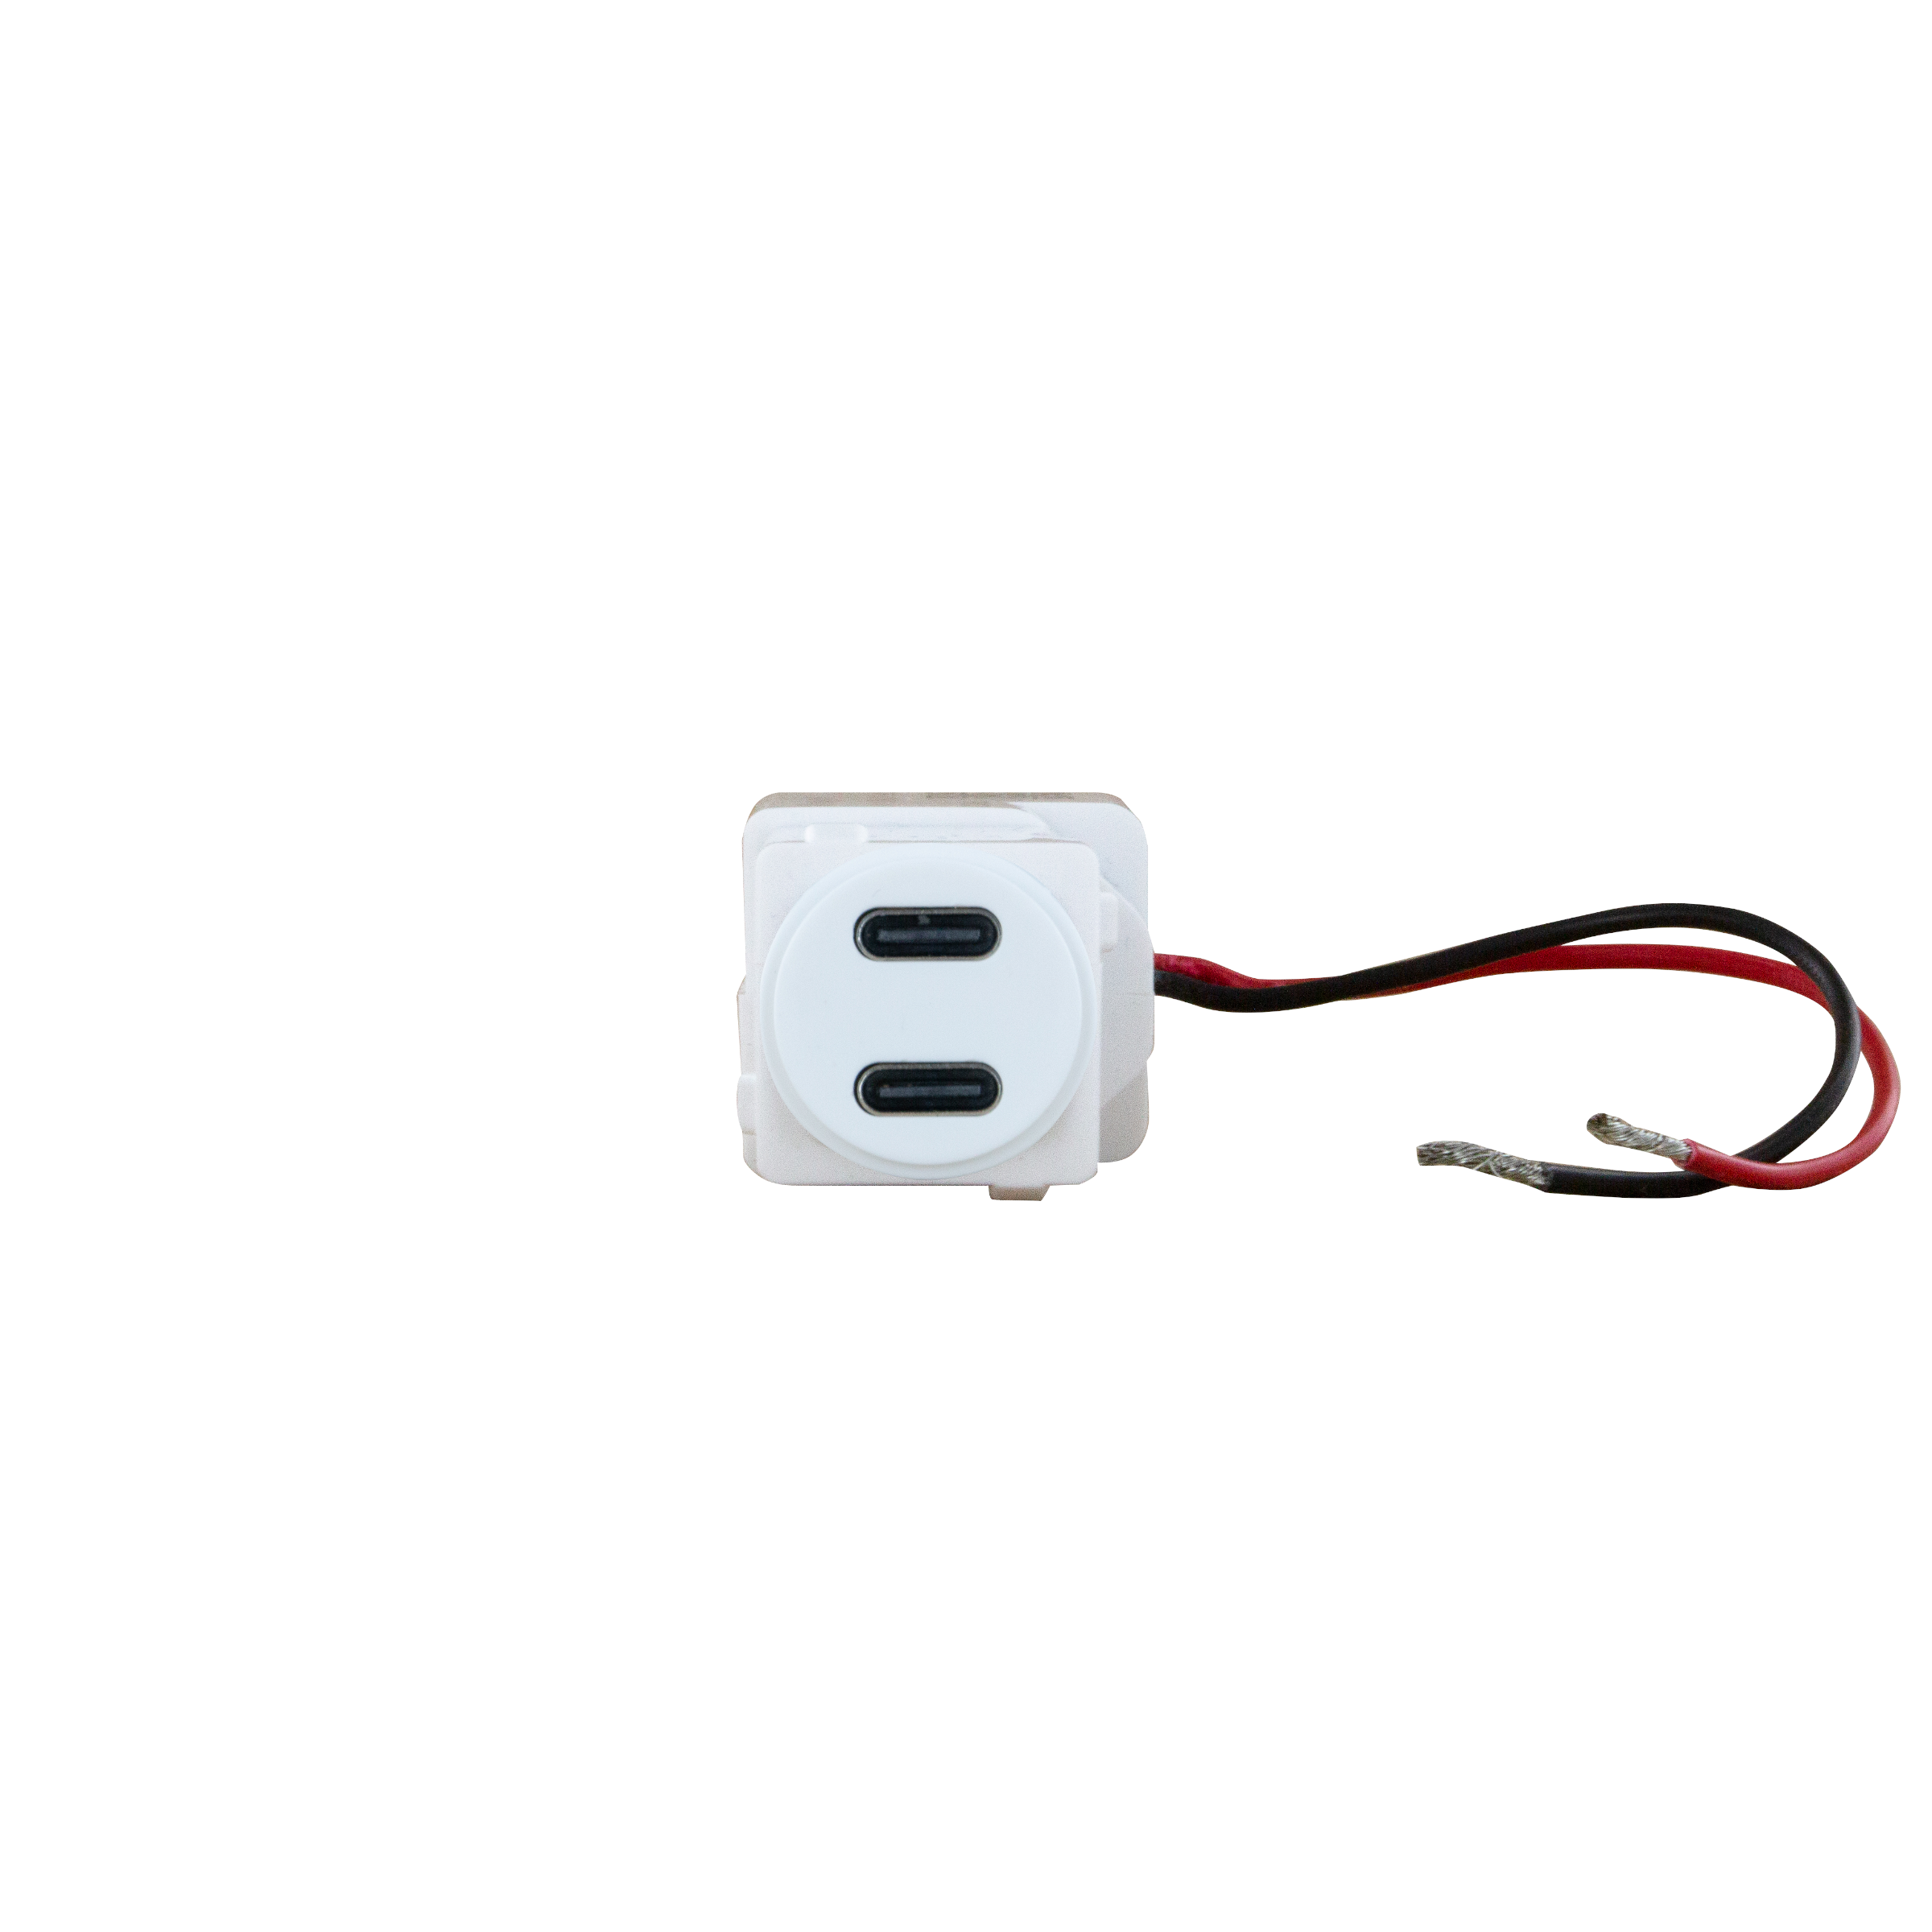 EXCEL LIFE USB CHARGER MECHANISM TYPE C+C 3A WHITE